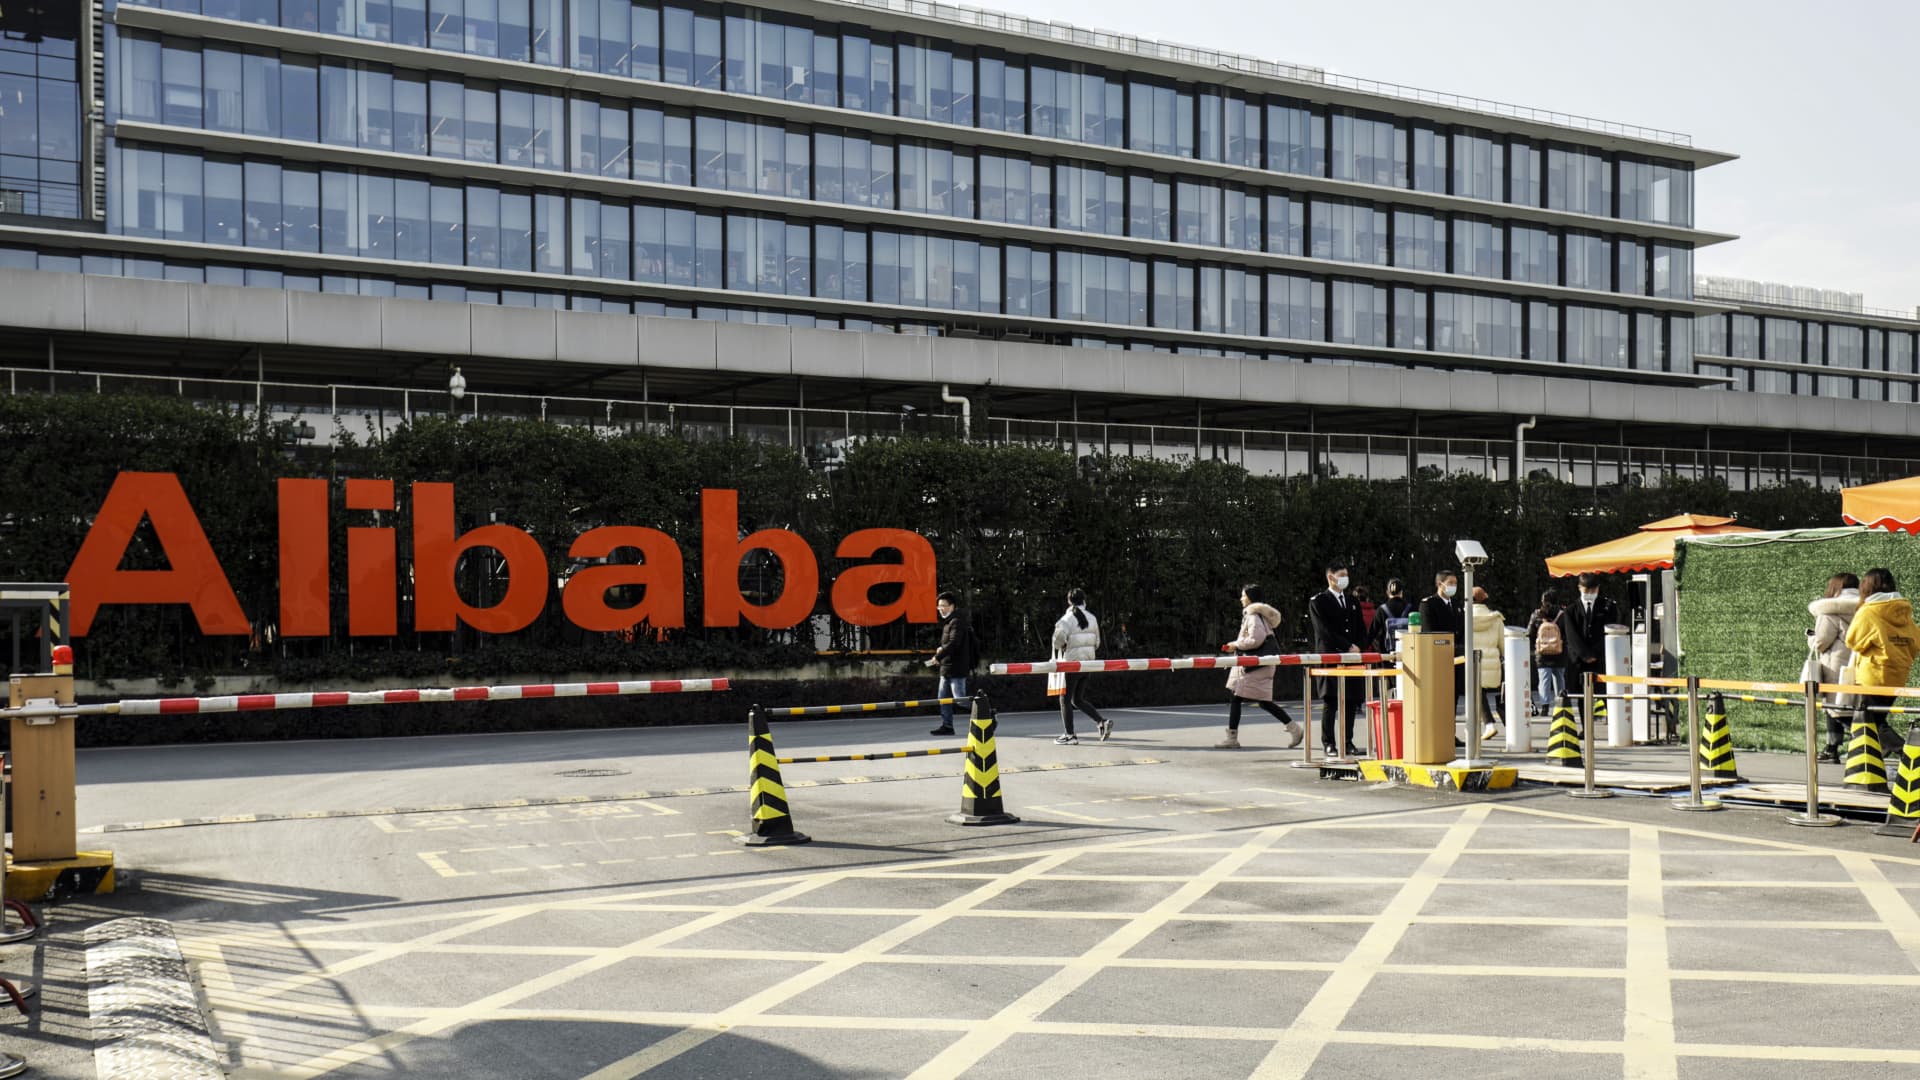 Chinese stocks are looking cheap. Fund manager explains why he’s betting on Alibaba